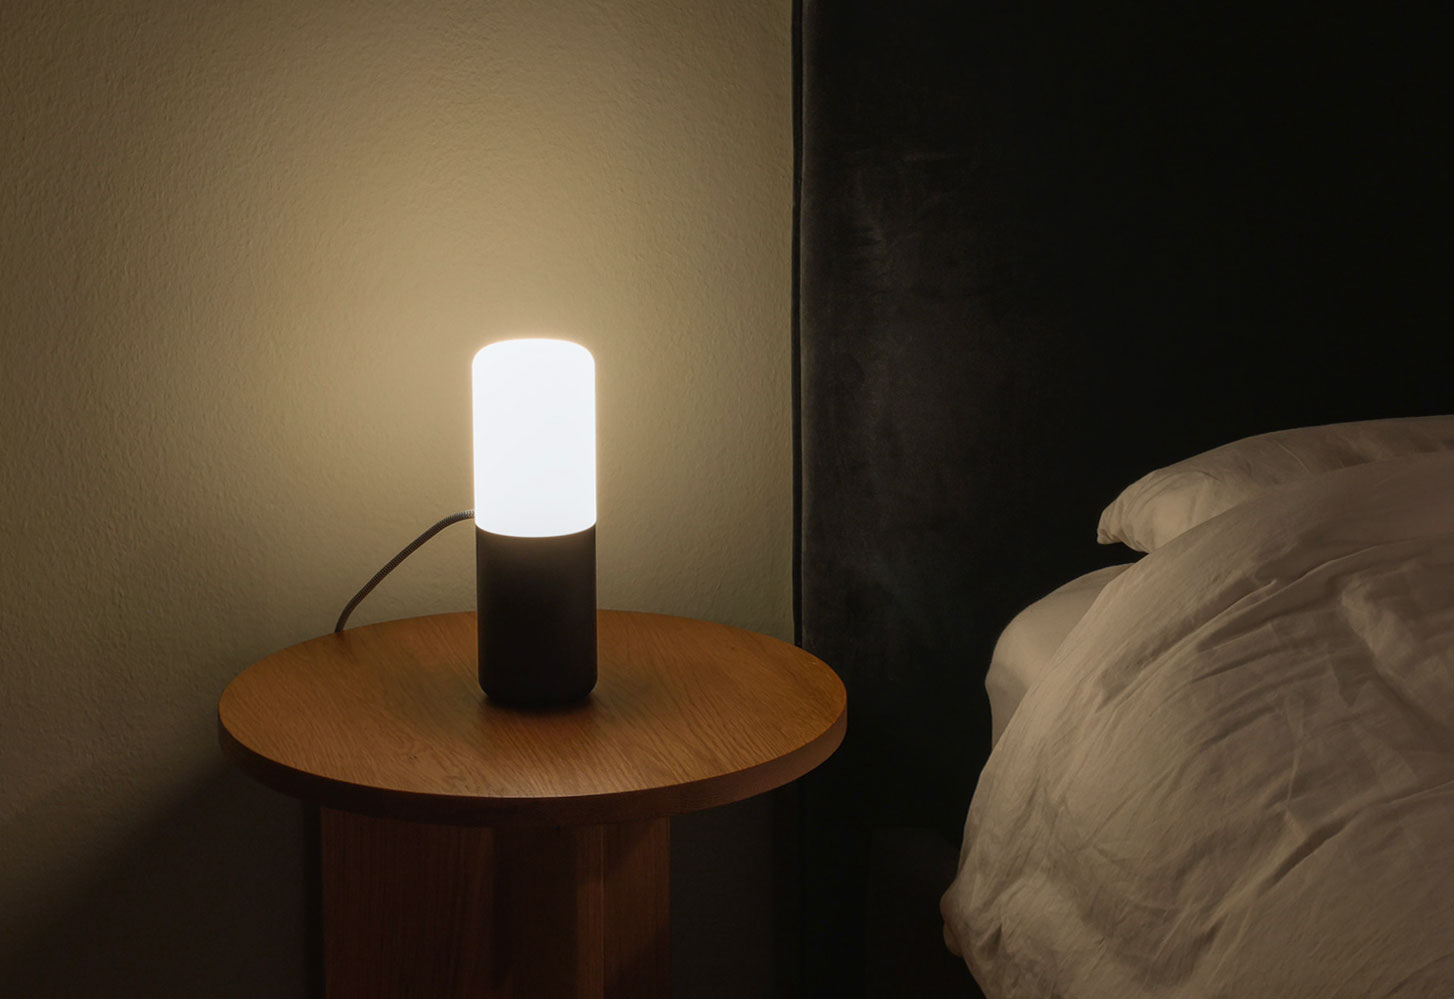 Photograph of the Switch light used as a bedside table light.